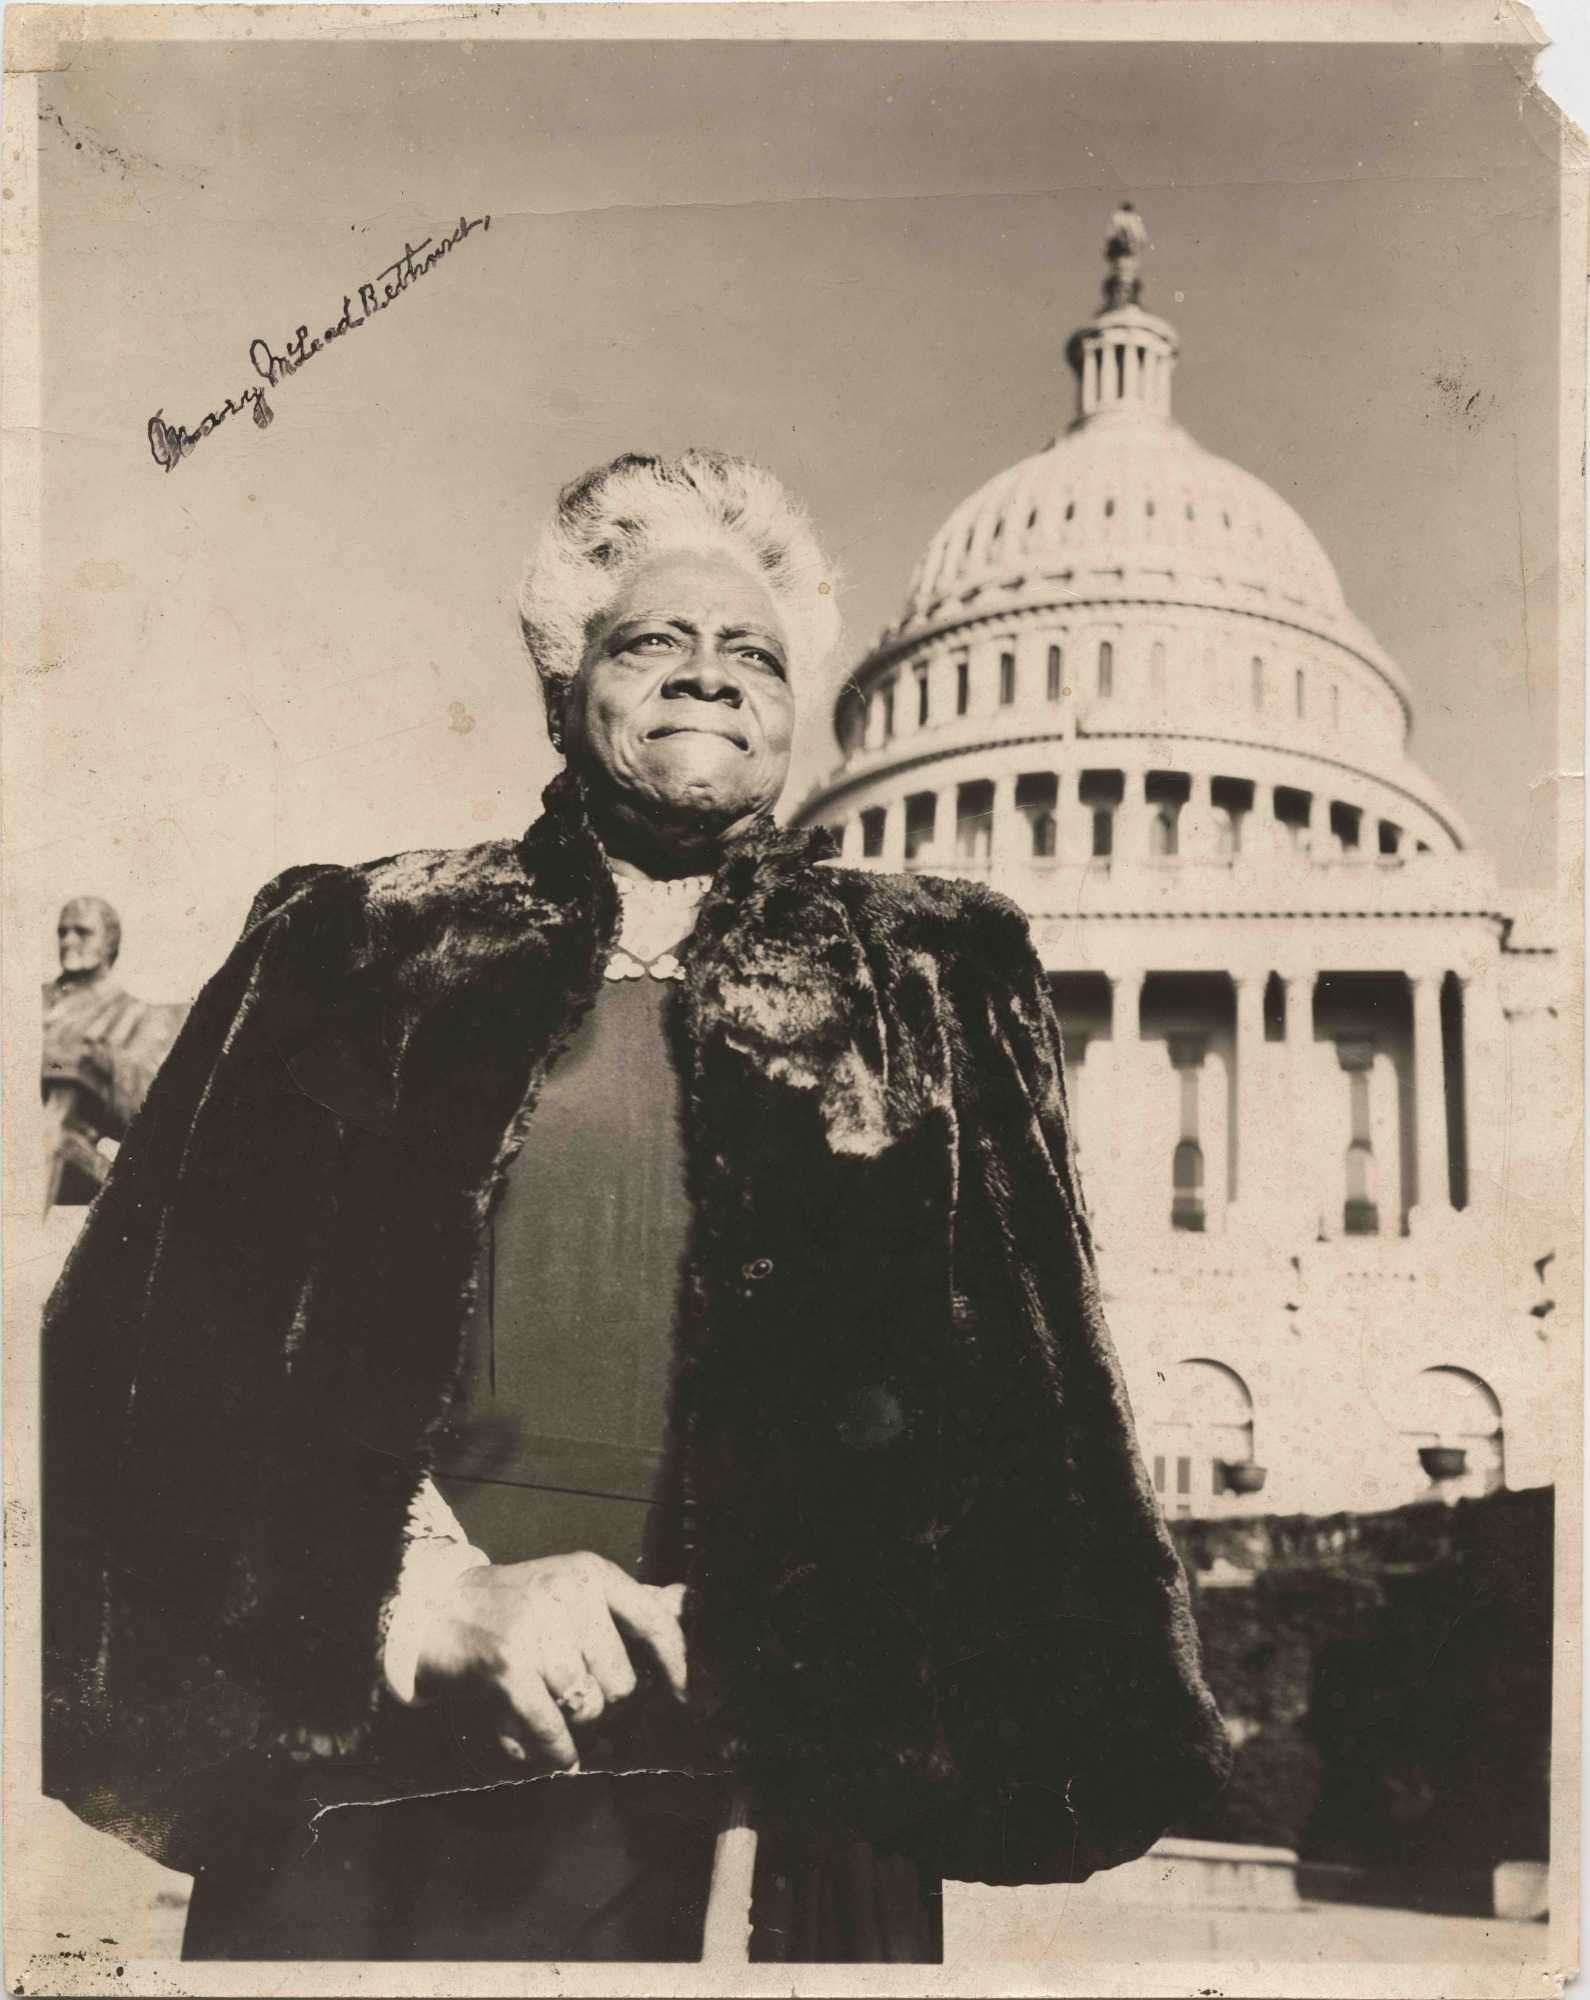 Photograph of Mary McLeod Bethune in front of the U.S. Capitol